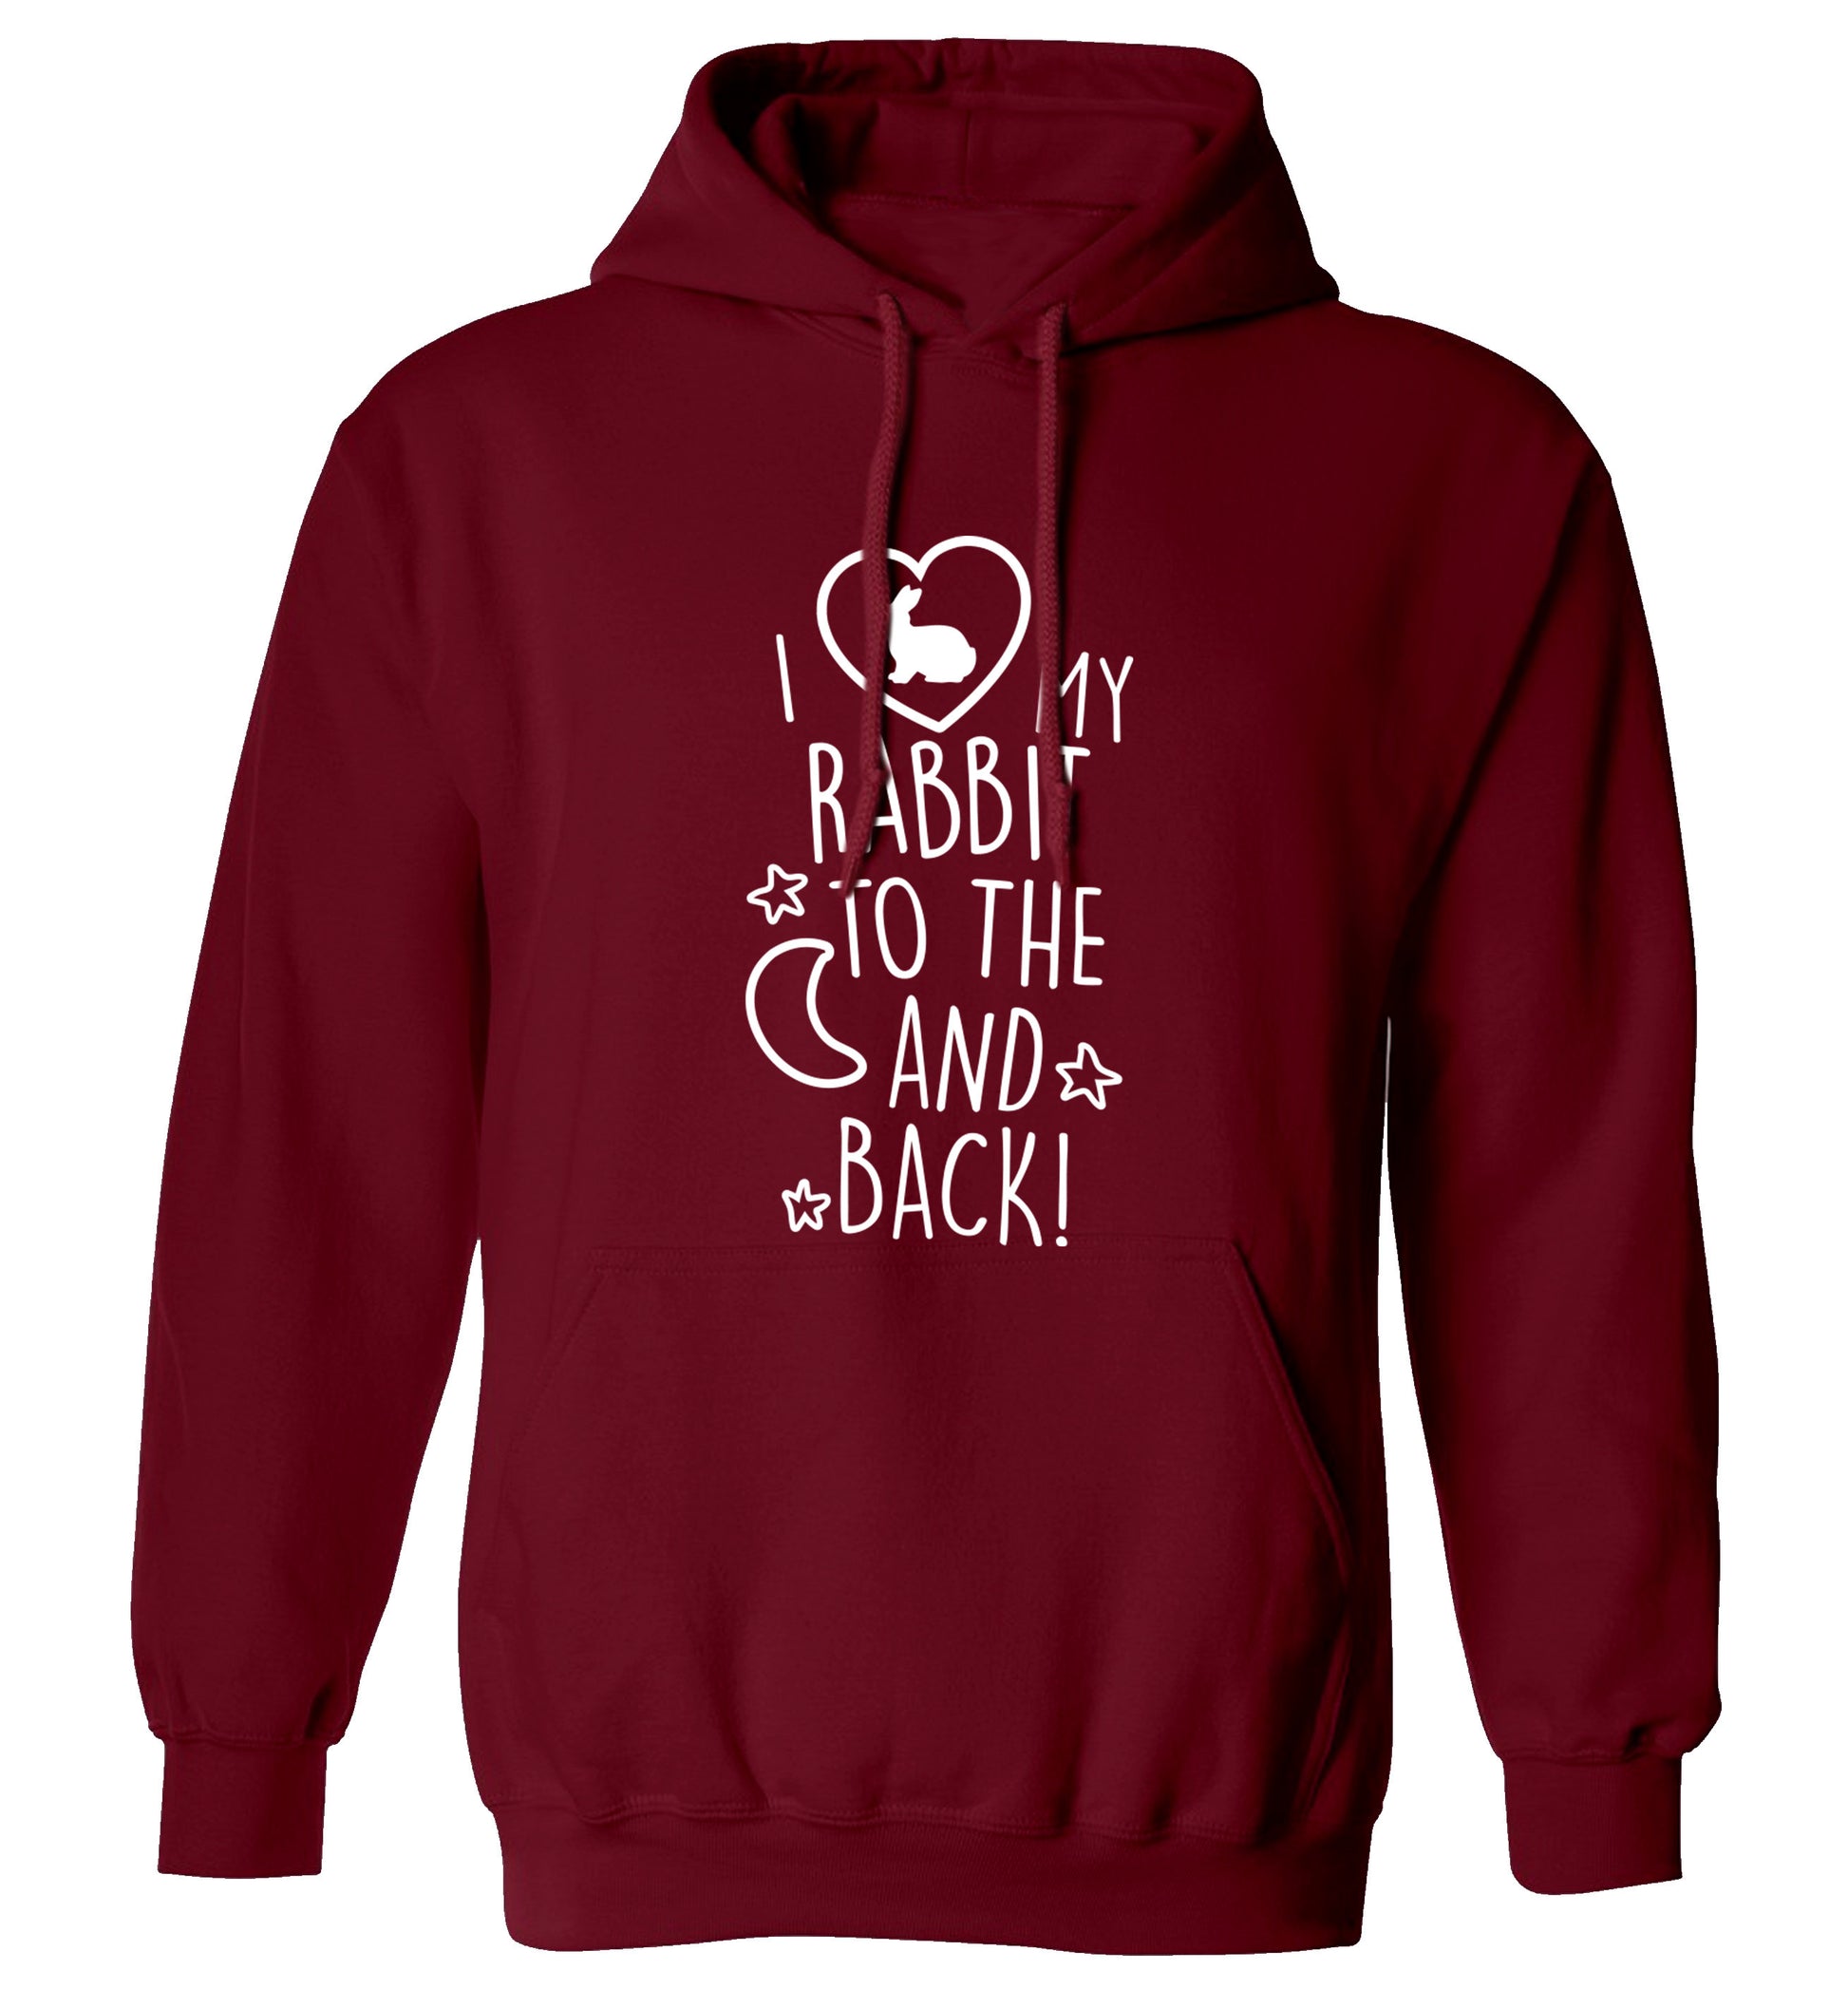 I love my rabbit to the moon and back adults unisex maroon hoodie 2XL